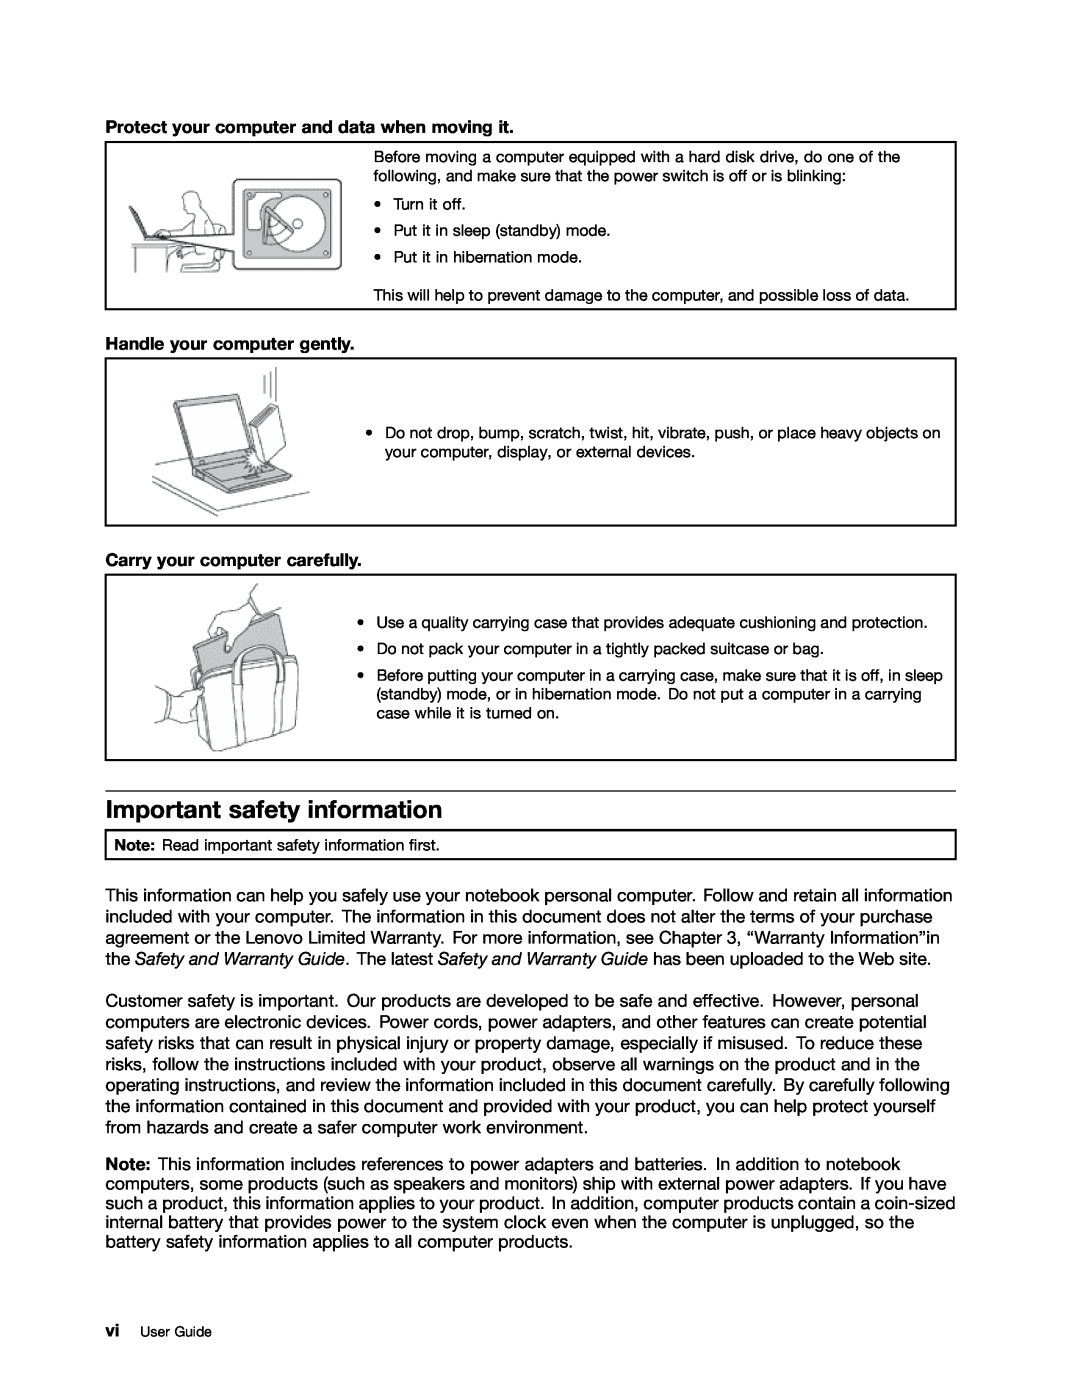 Lenovo 114155U Important safety information, Protect your computer and data when moving it, Handle your computer gently 